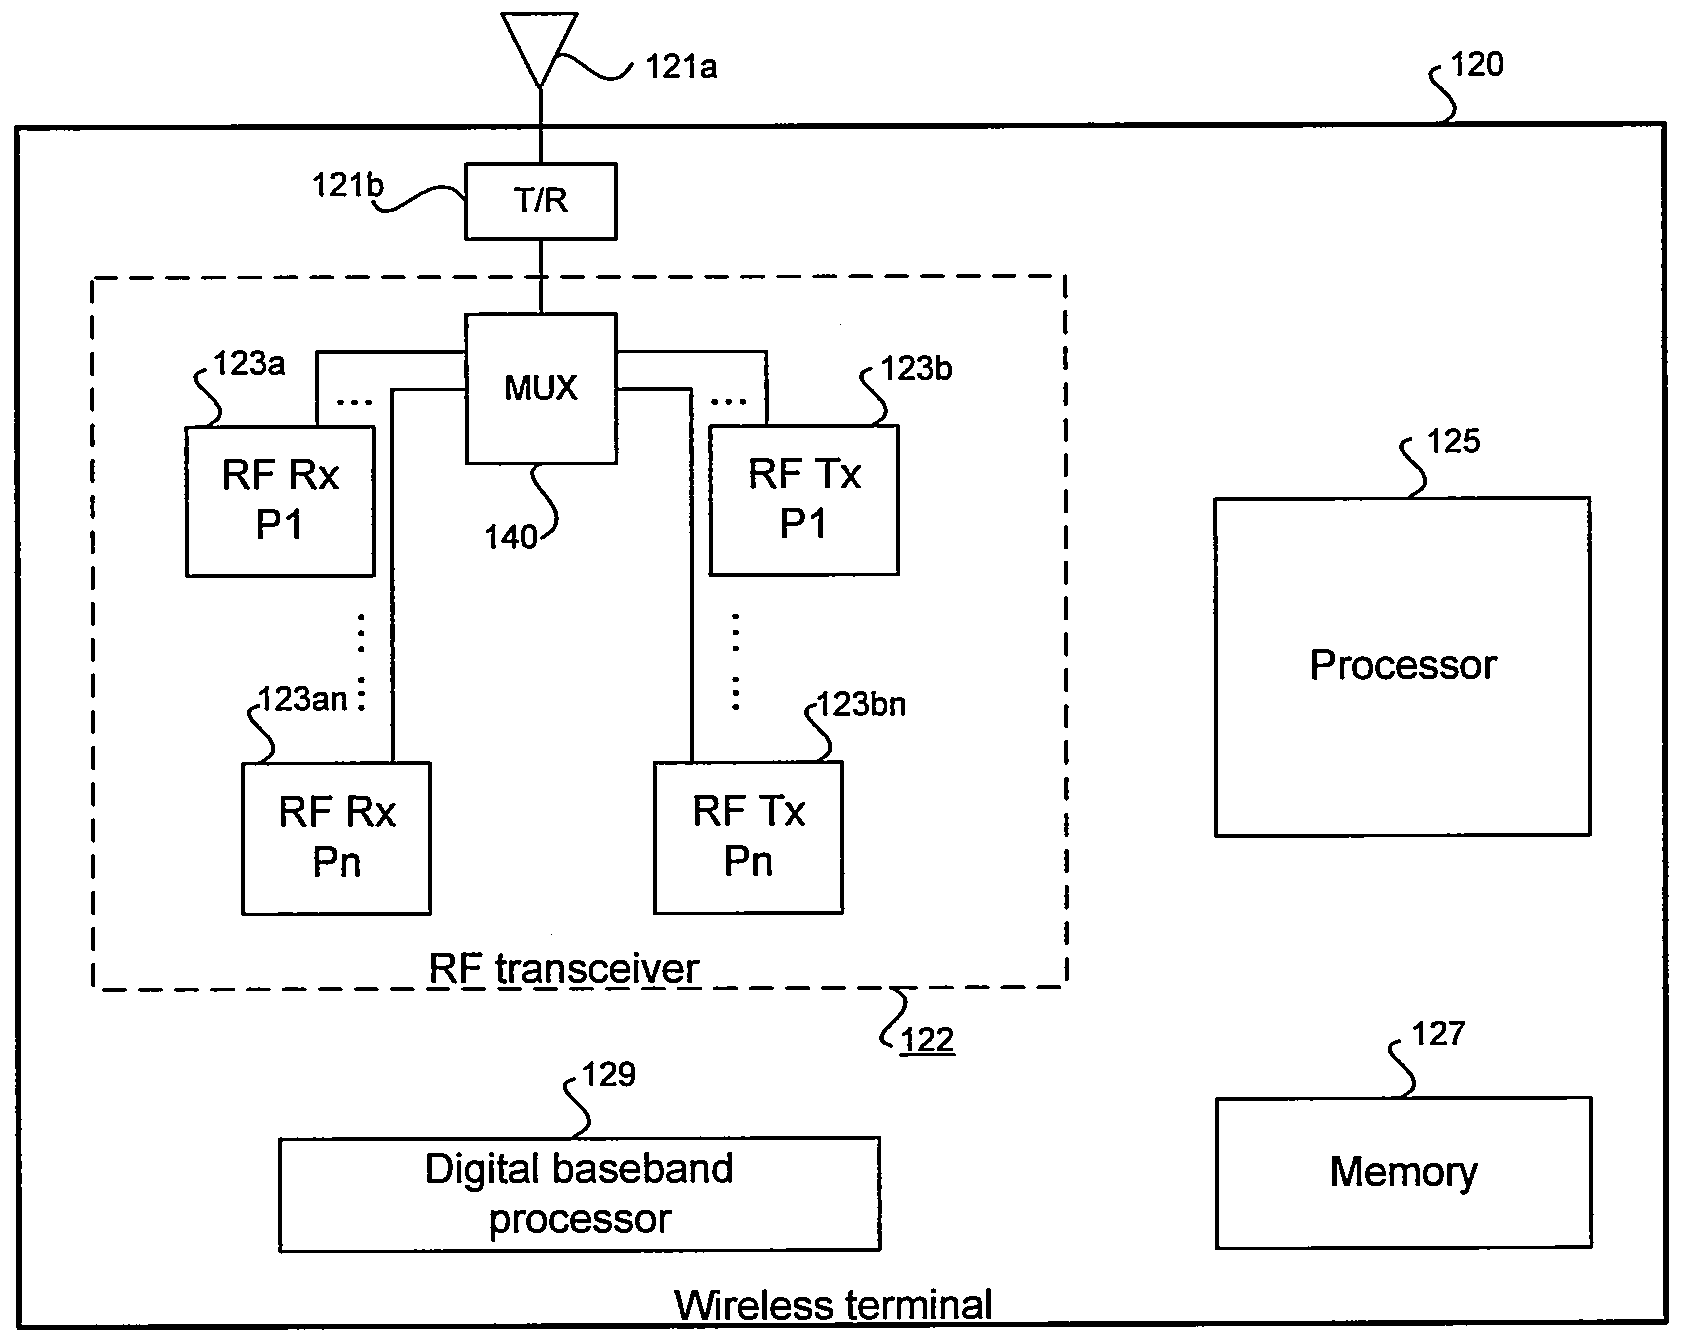 Method and System for Shared High-Power Transmit Path for a Multi-Protocol Transceiver